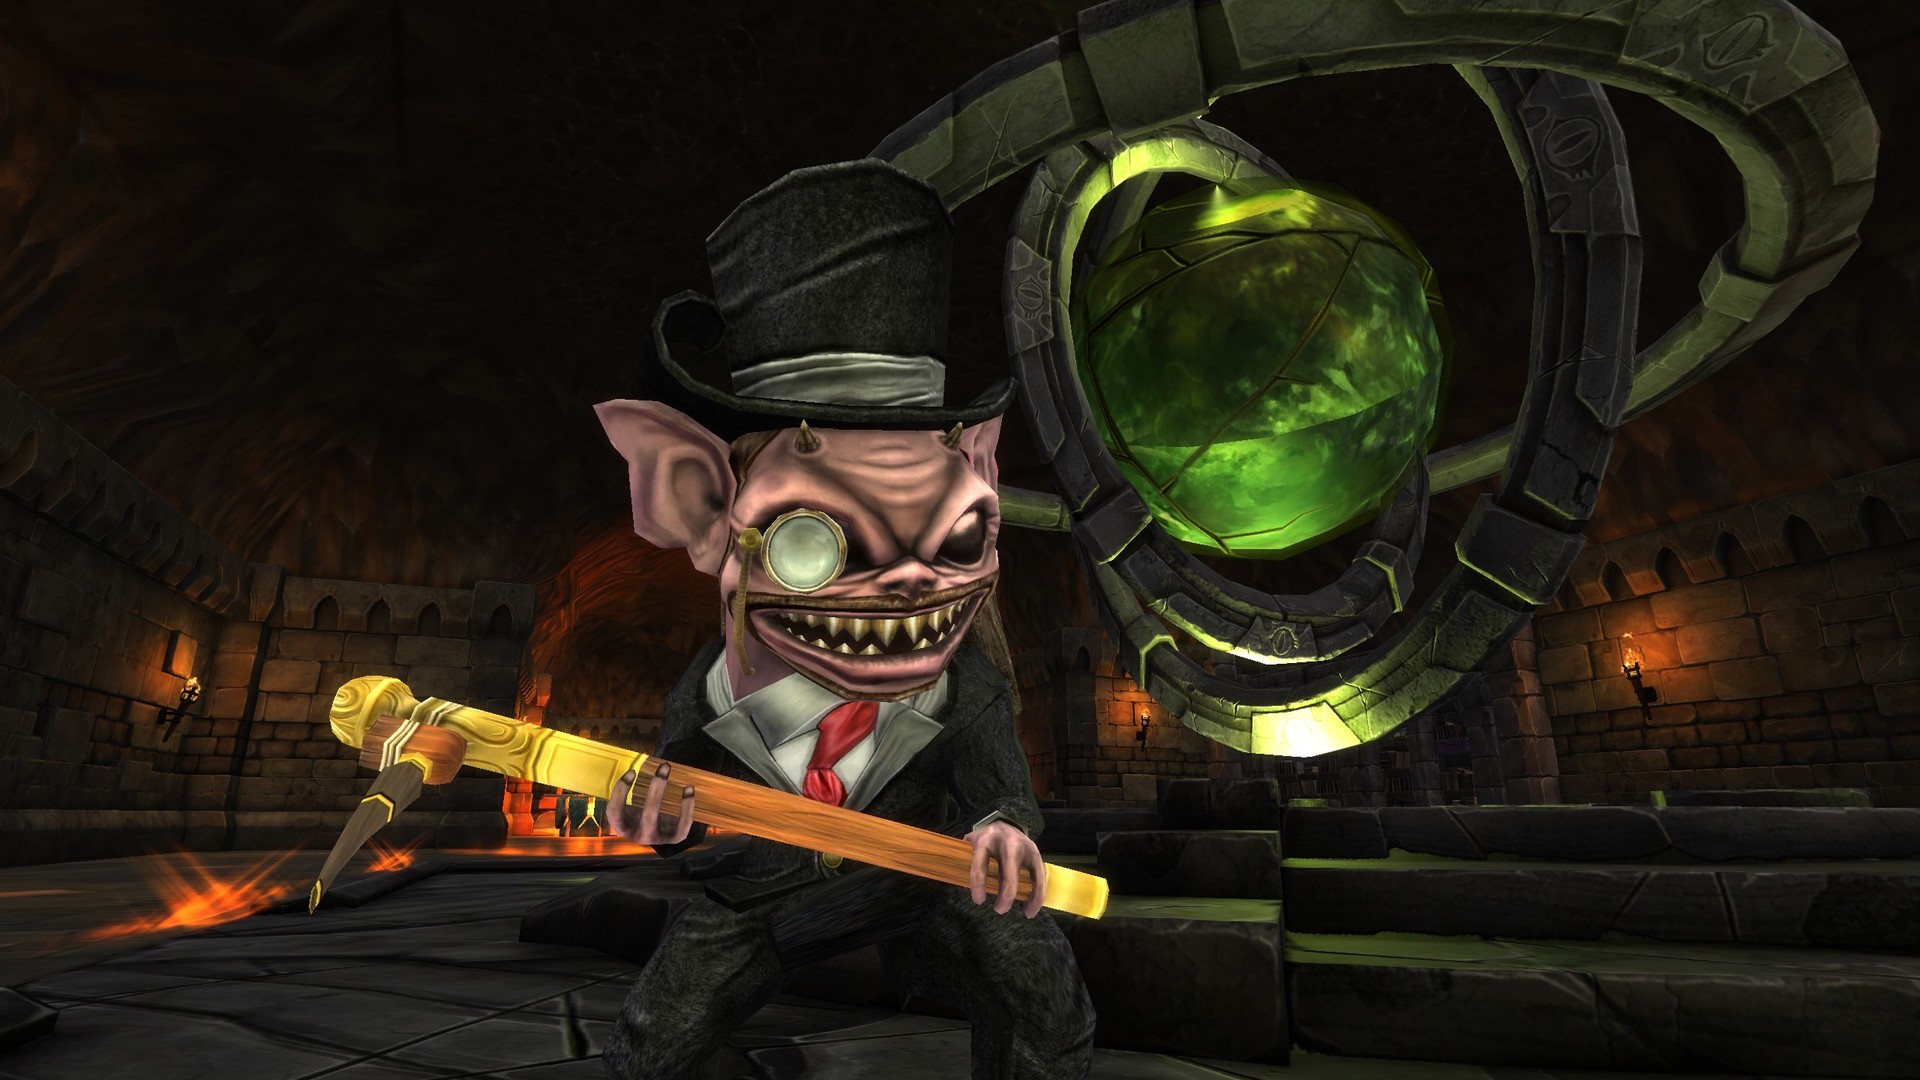 War for the Overworld - The Cynical Imp (Charity DLC) Featured Screenshot #1